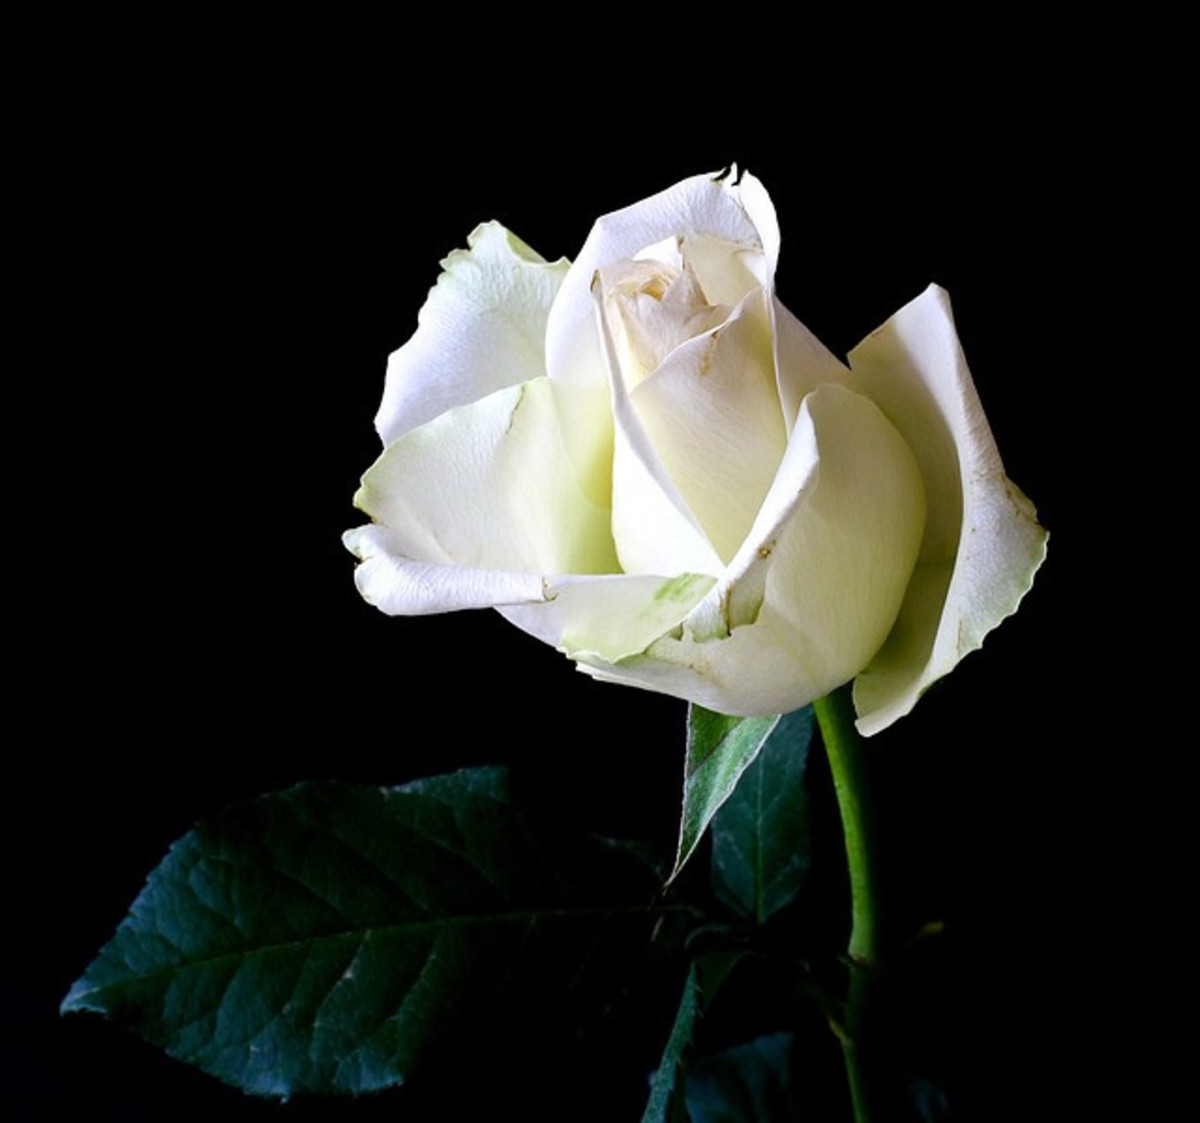 White roses represent purity.